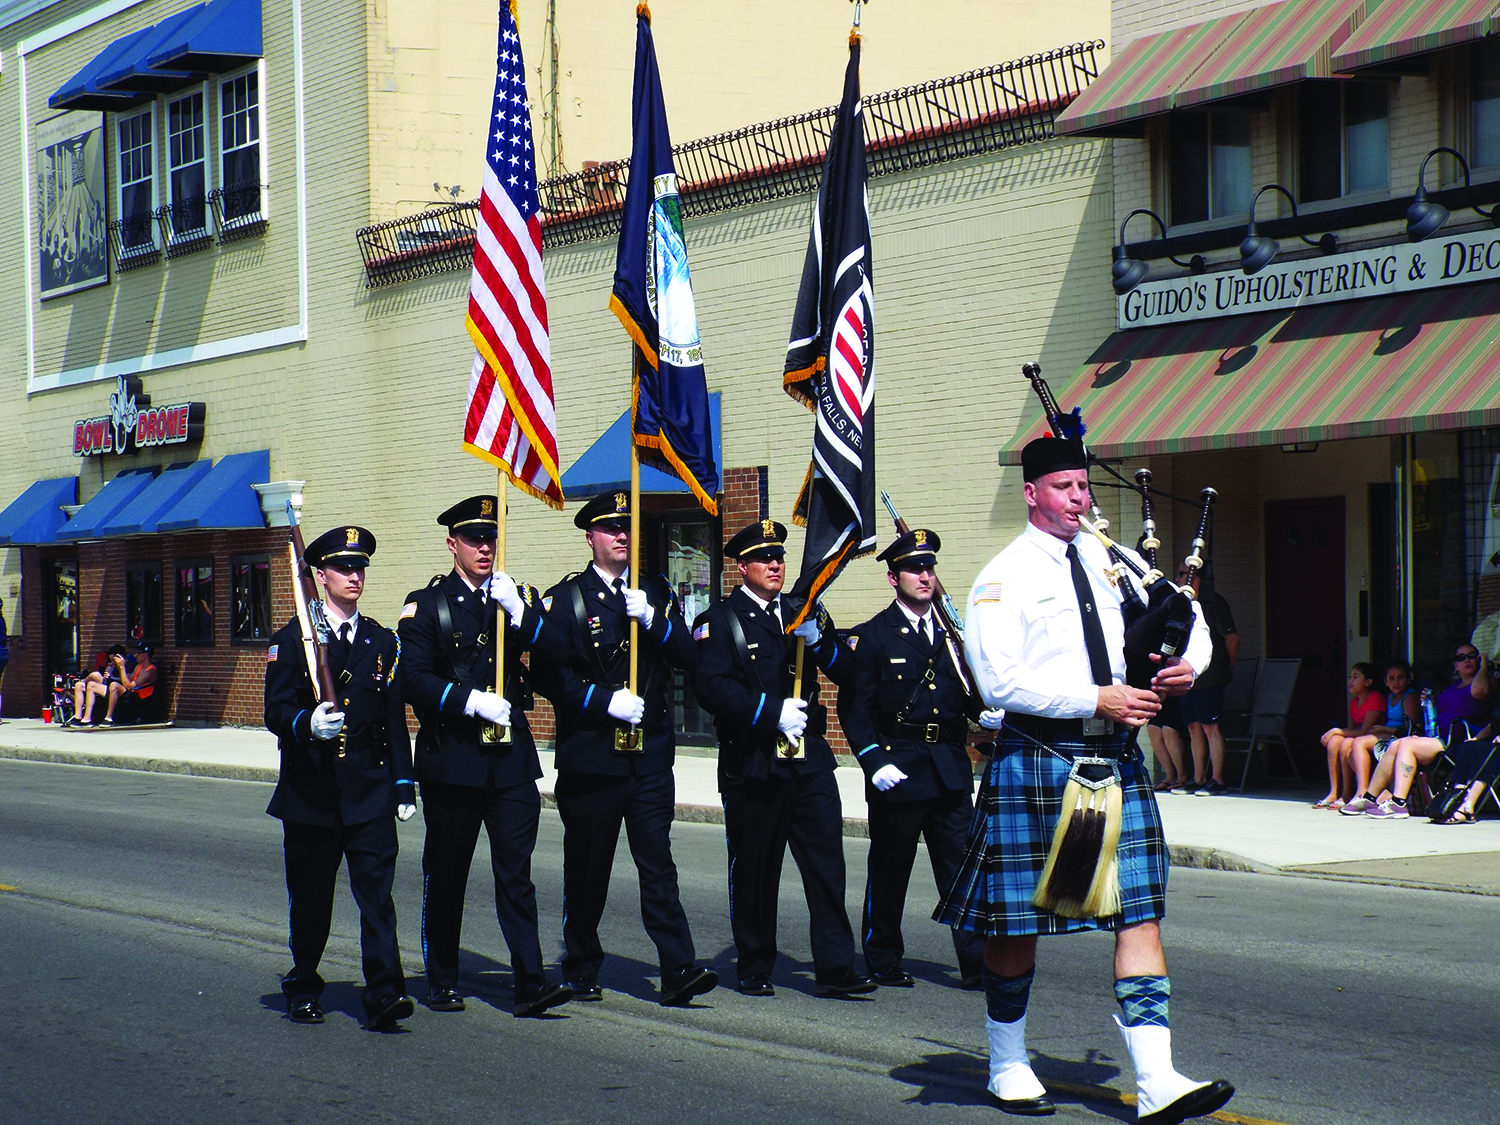 The Niagara Falls Police Department Honor Guard, led by bagpiper Dave Cudahee led the parade down Pine Avenue.